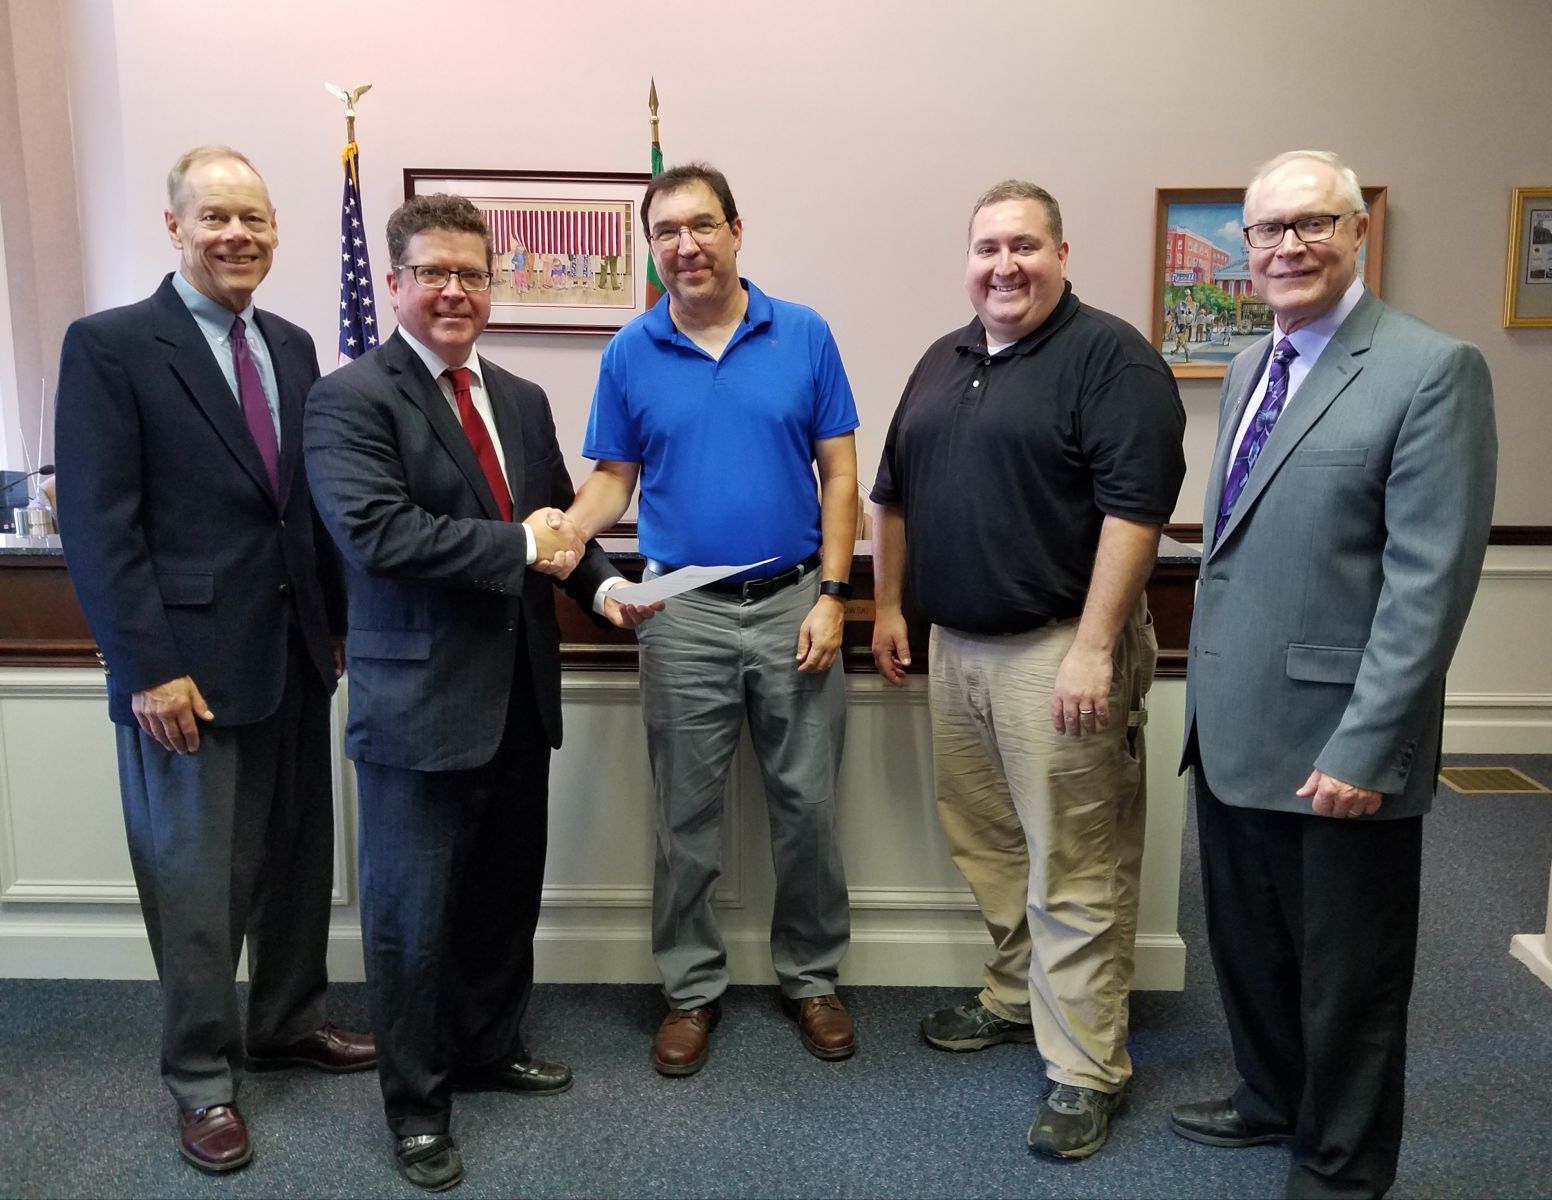 Pictured above (left to right): Commissioner Bob Ziobrowski, Commissioner Chairman Dave Keller, CVRTC President Garret Stahlman, CVRTC volunteer Jim Stanton, and Commissioner Bob Thomas.  The commissioners present CVRTC with a copy of the signed resolution authorizing the donation of the rail car.